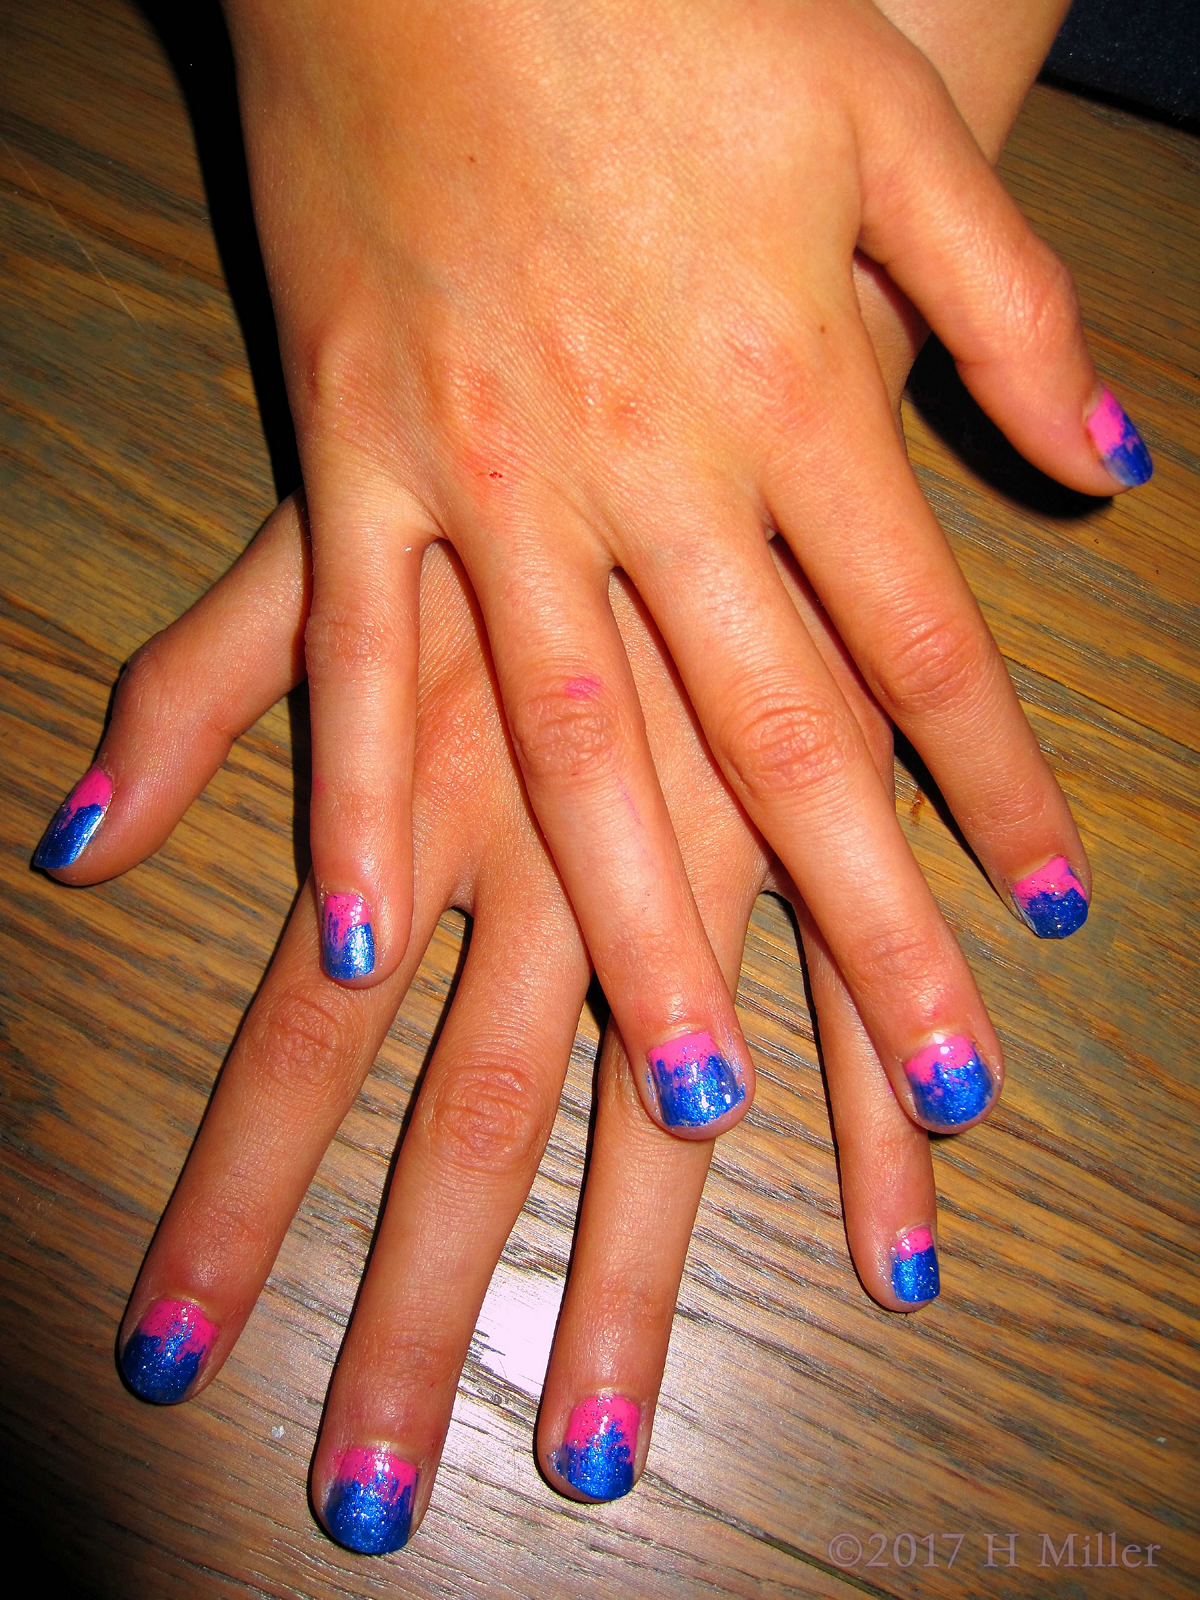 This Pink And Blue Ombre Kids Manicure Is So Pretty!